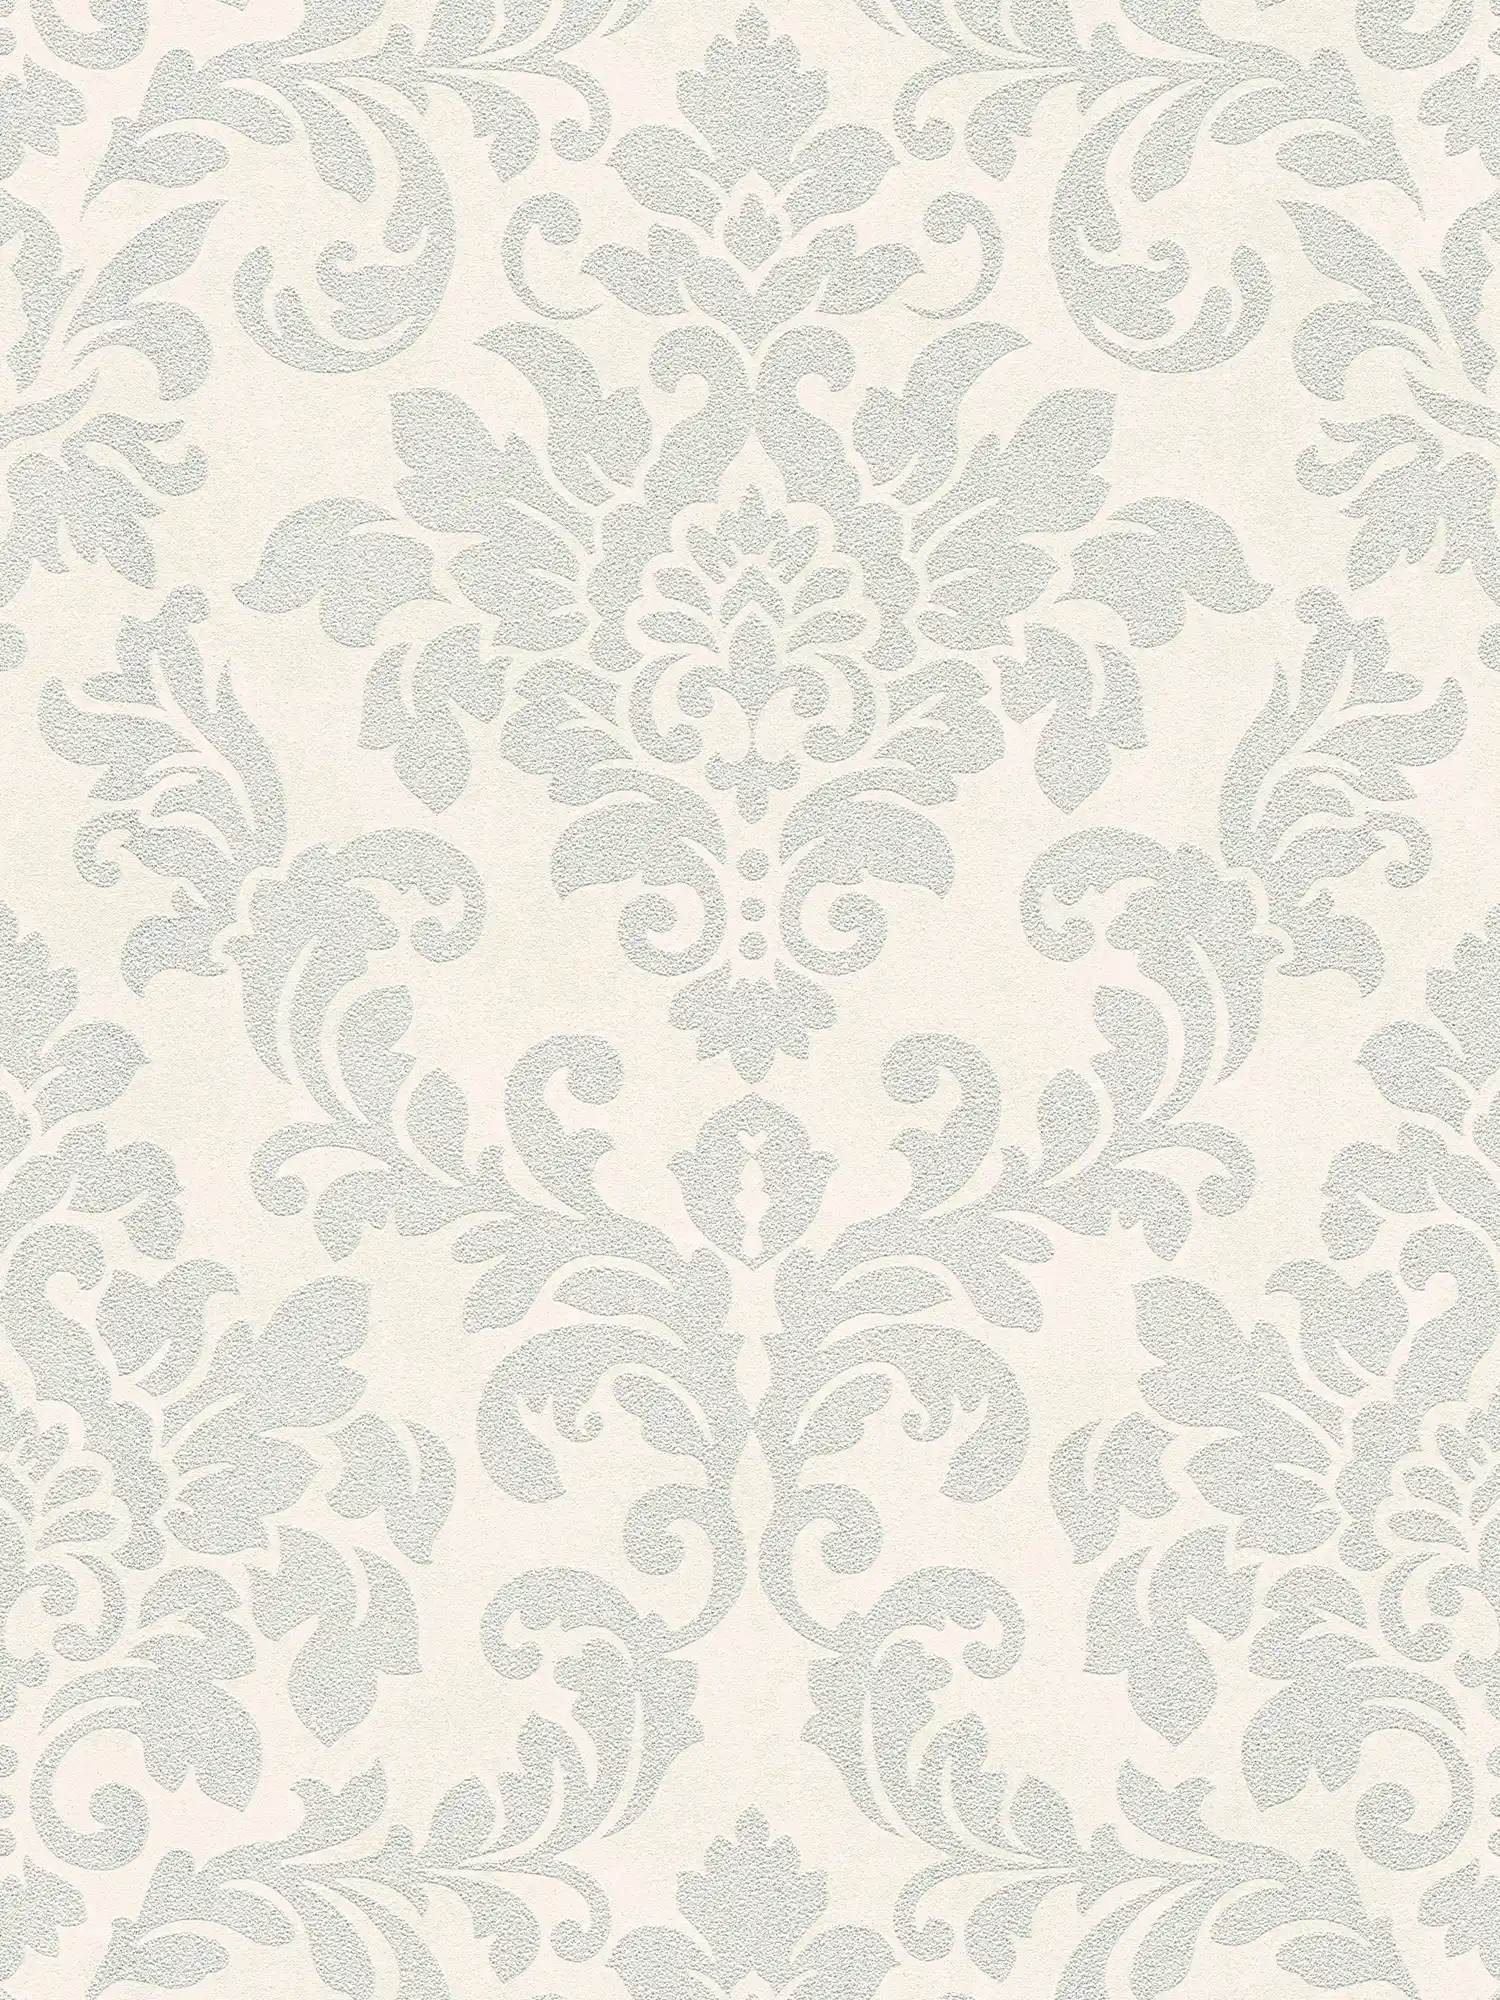 Floral ornamental wallpaper with metallic effect - grey, silver, white
